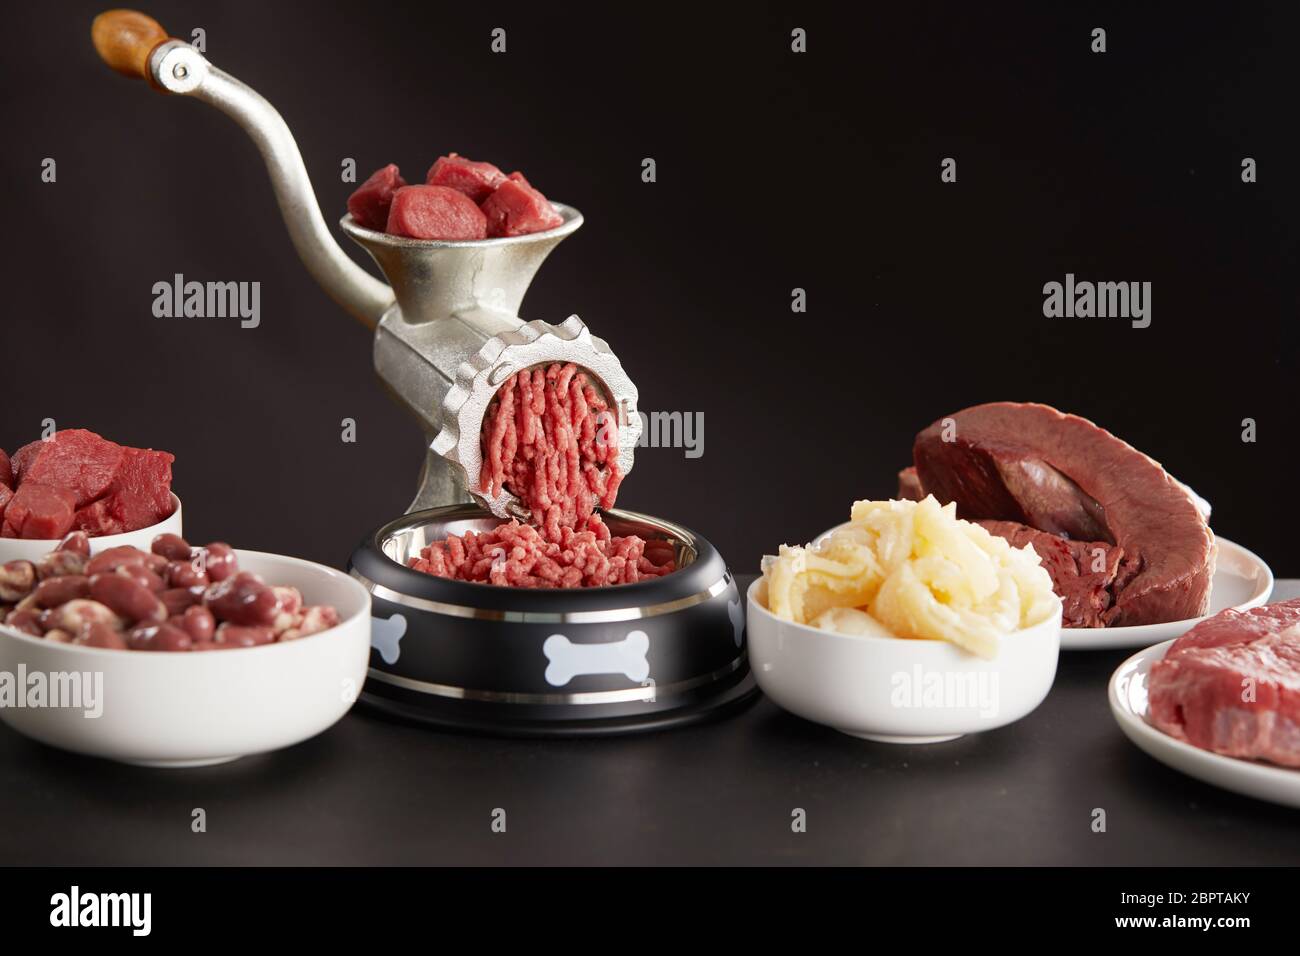 Preparing fresh raw meat for barf dog food with a mix of poultry